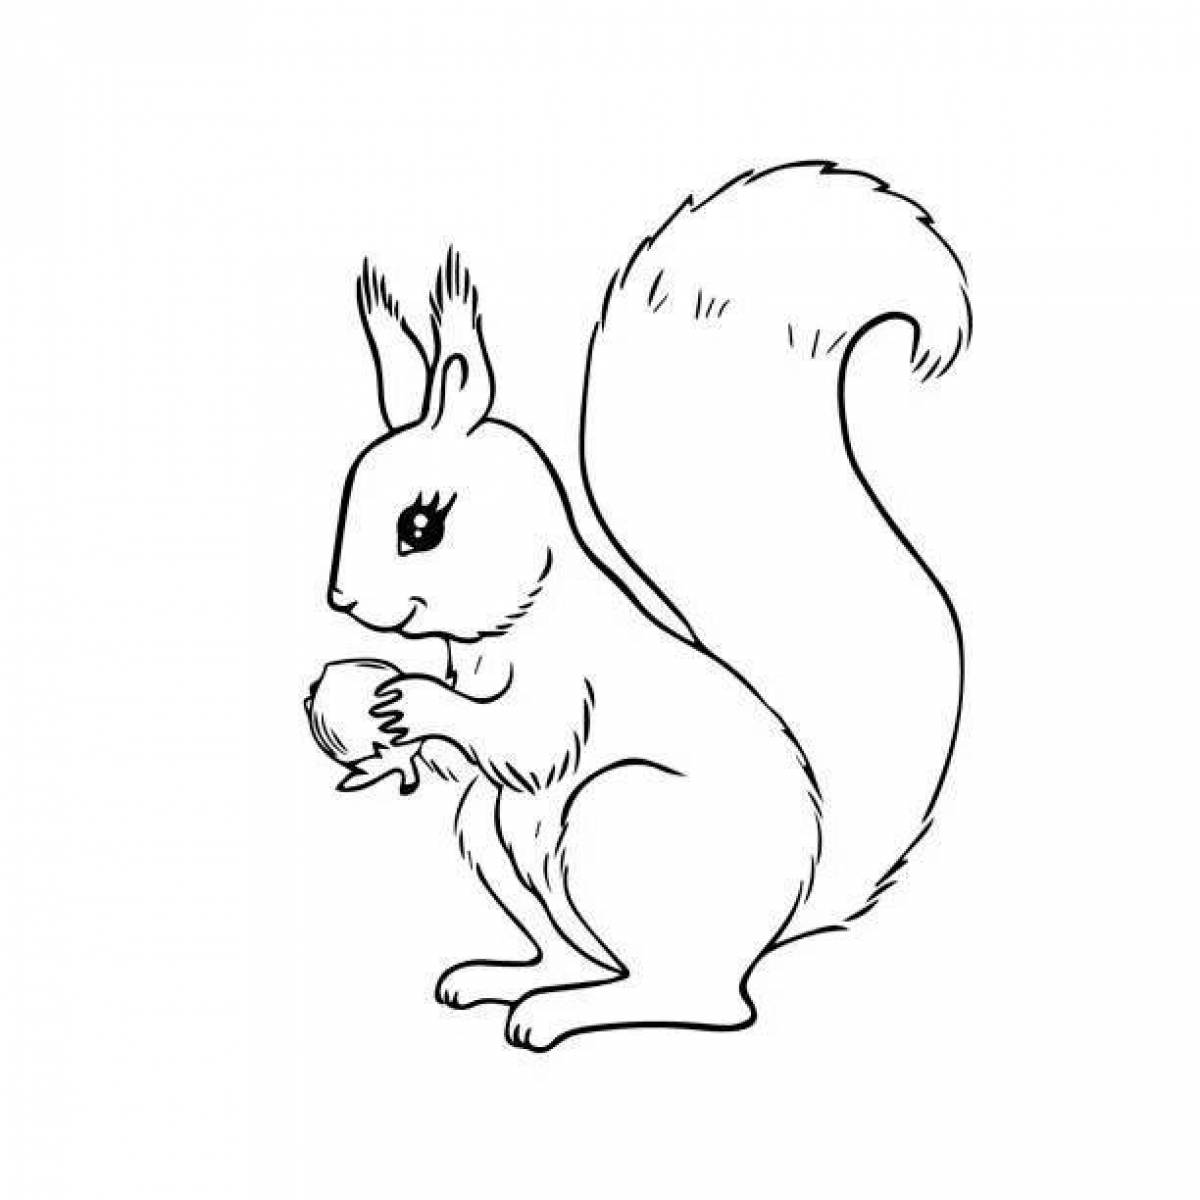 Violent squirrel coloring book for 3-4 year olds